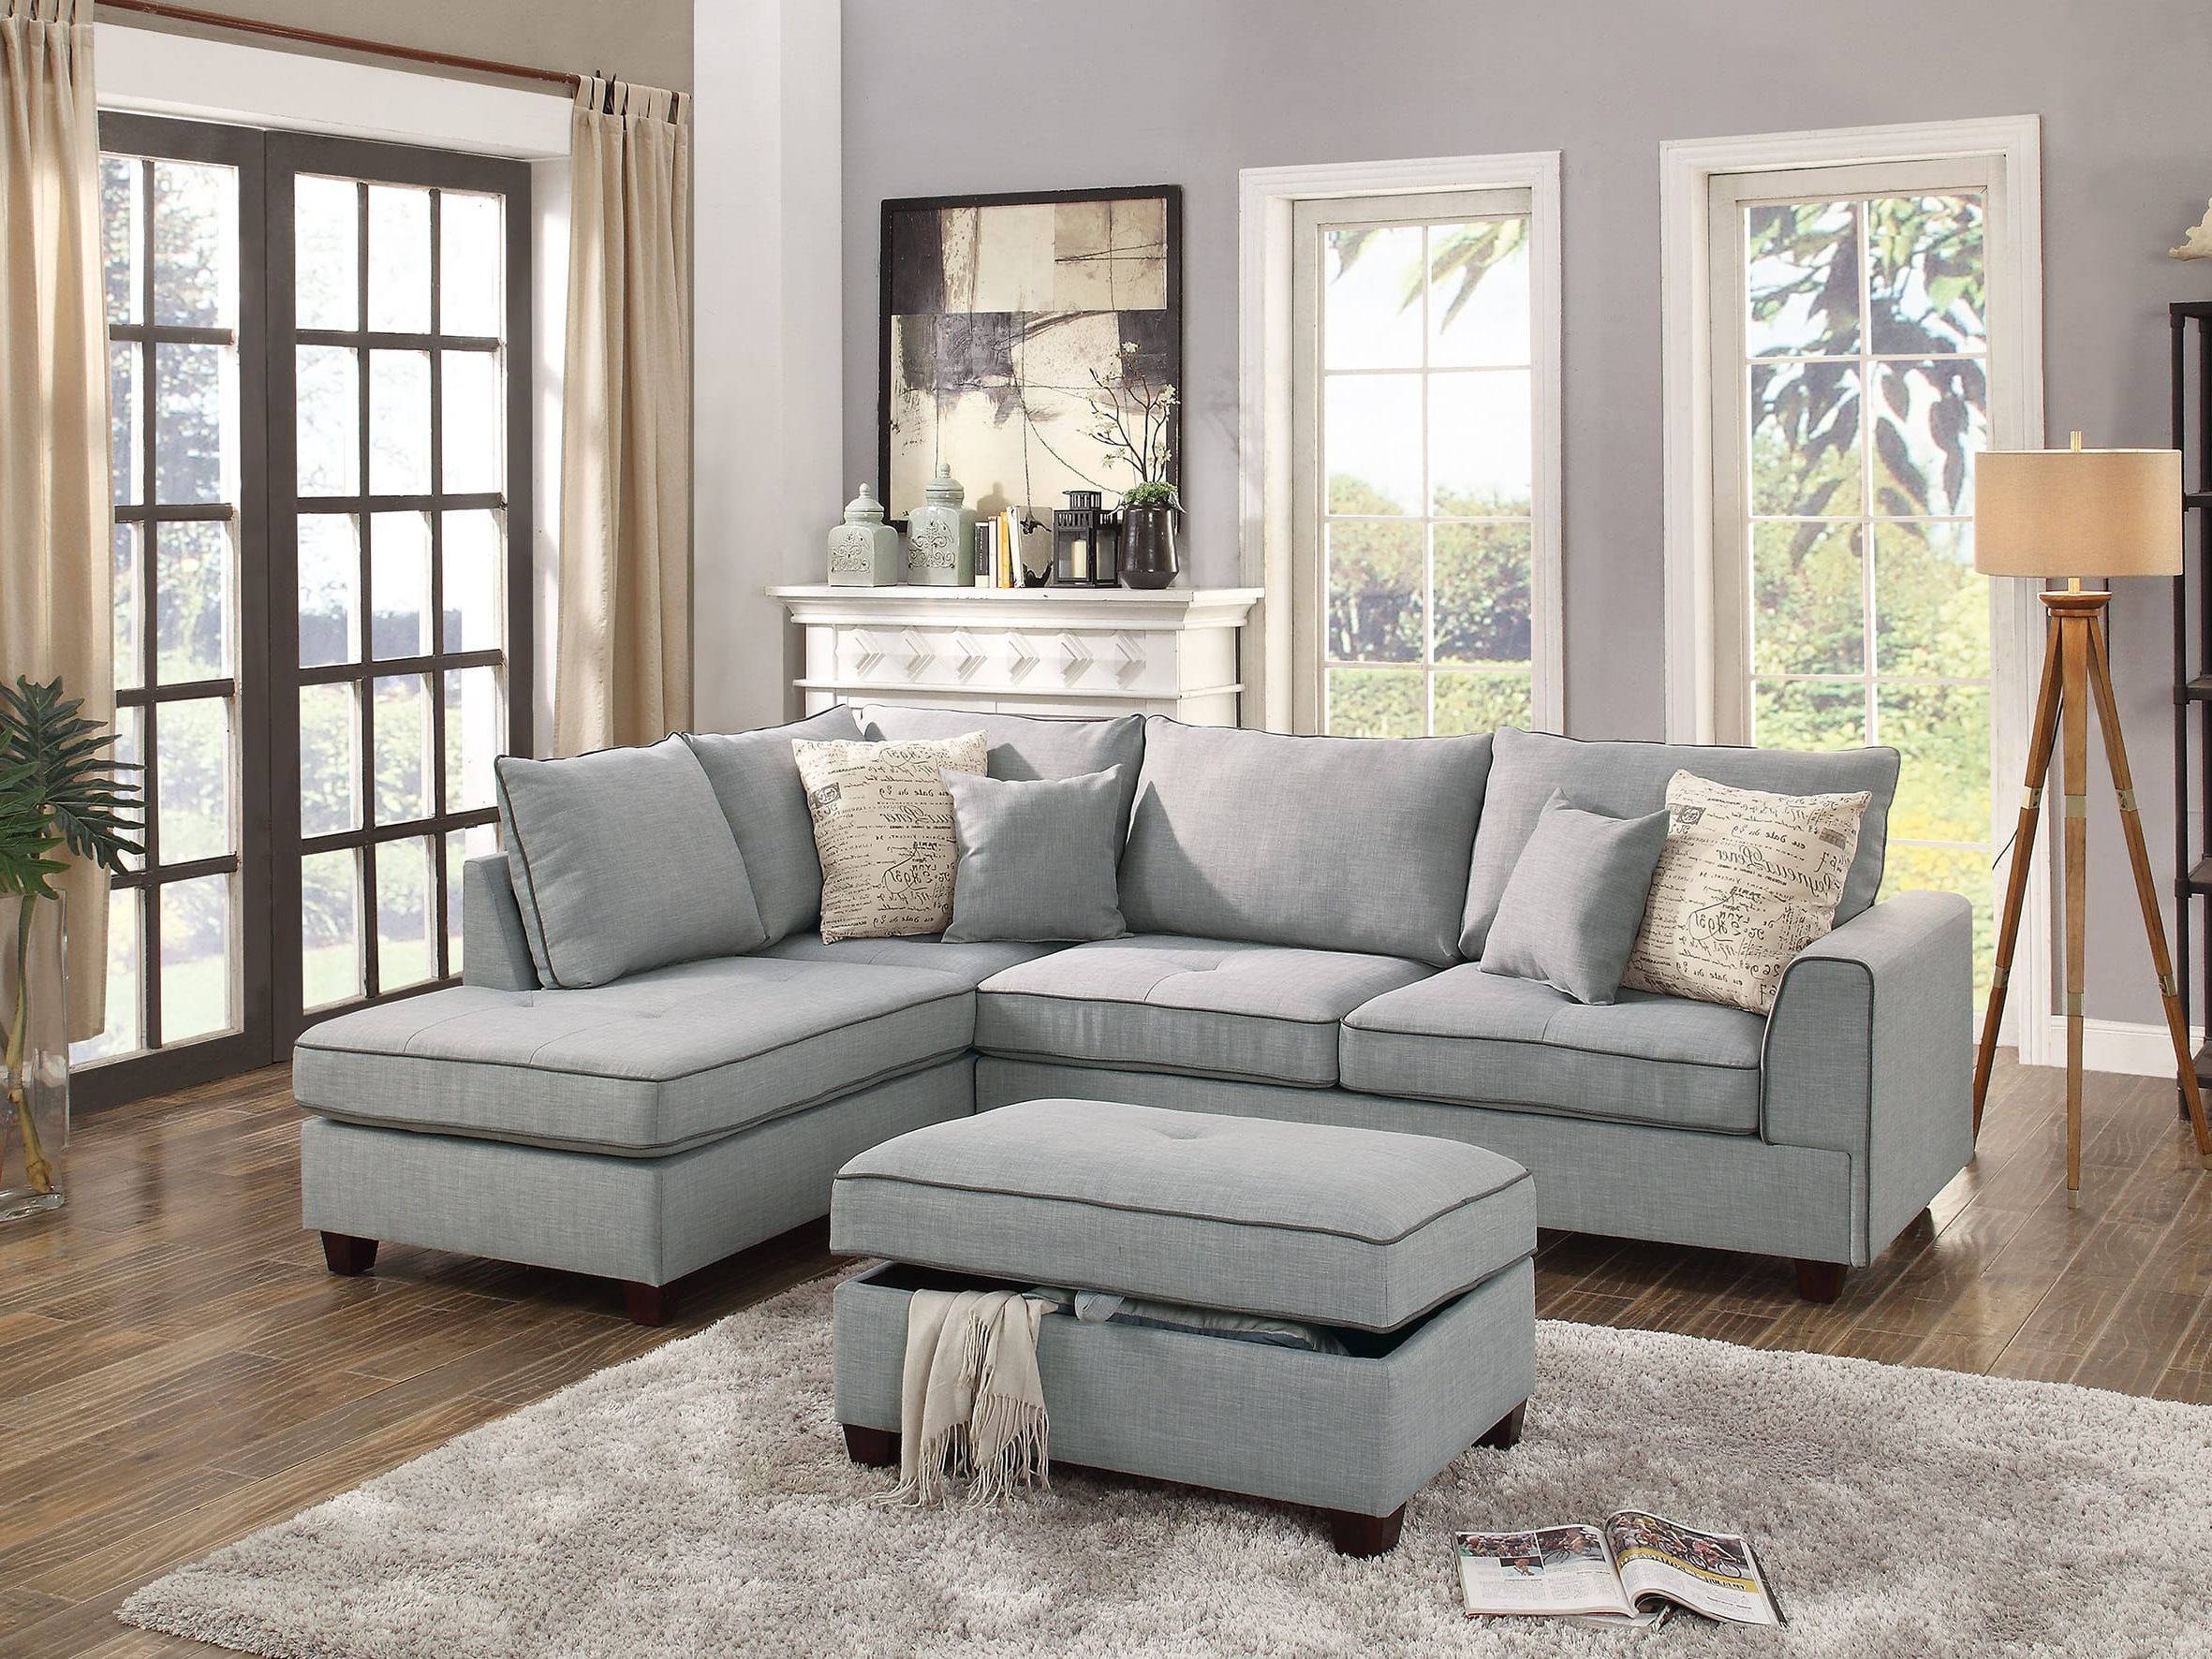 Well Liked Sofas In Light Gray Inside F6543 Light Gray 3 Pcs Sectional Sofa Setpoundex (View 10 of 15)